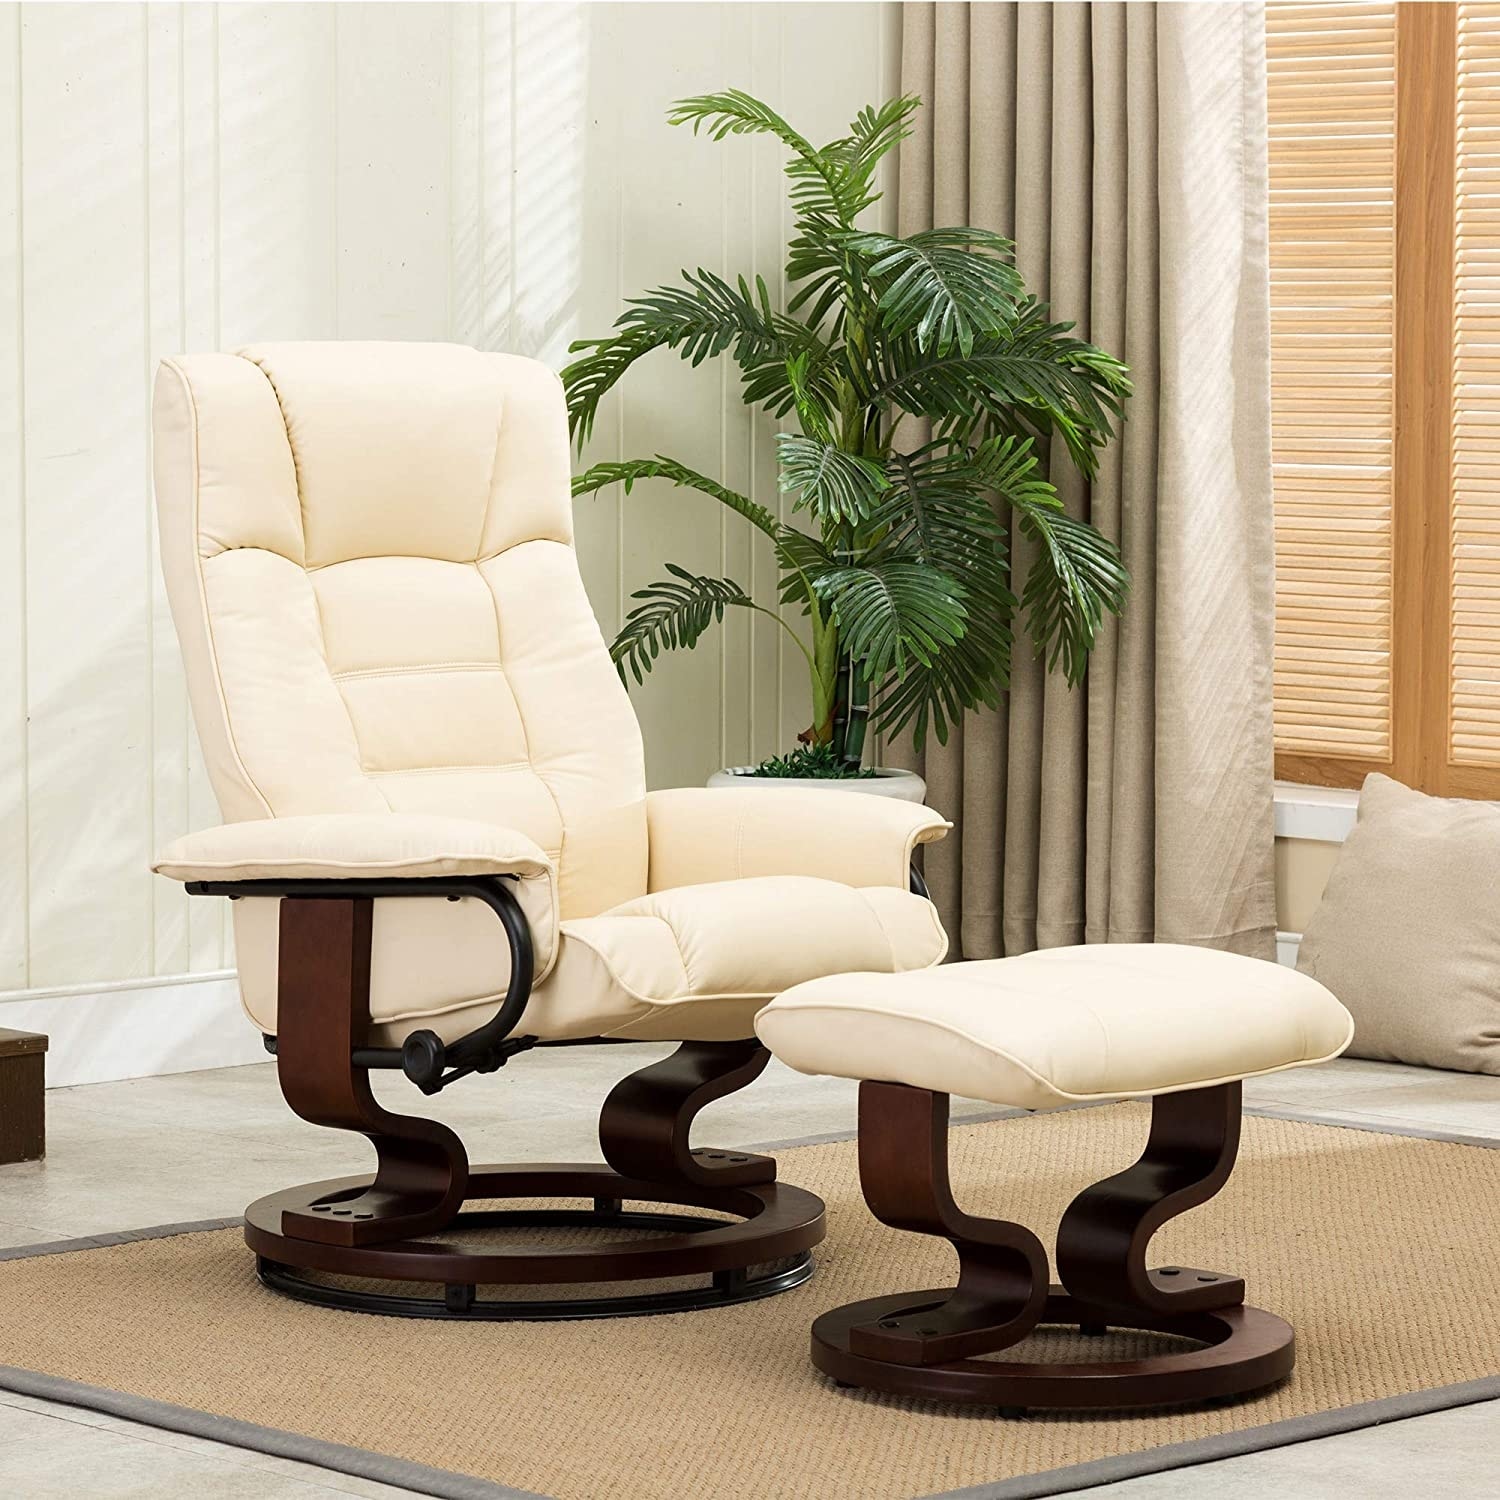 On Sale Recliner Chairs - Bed Bath & Beyond